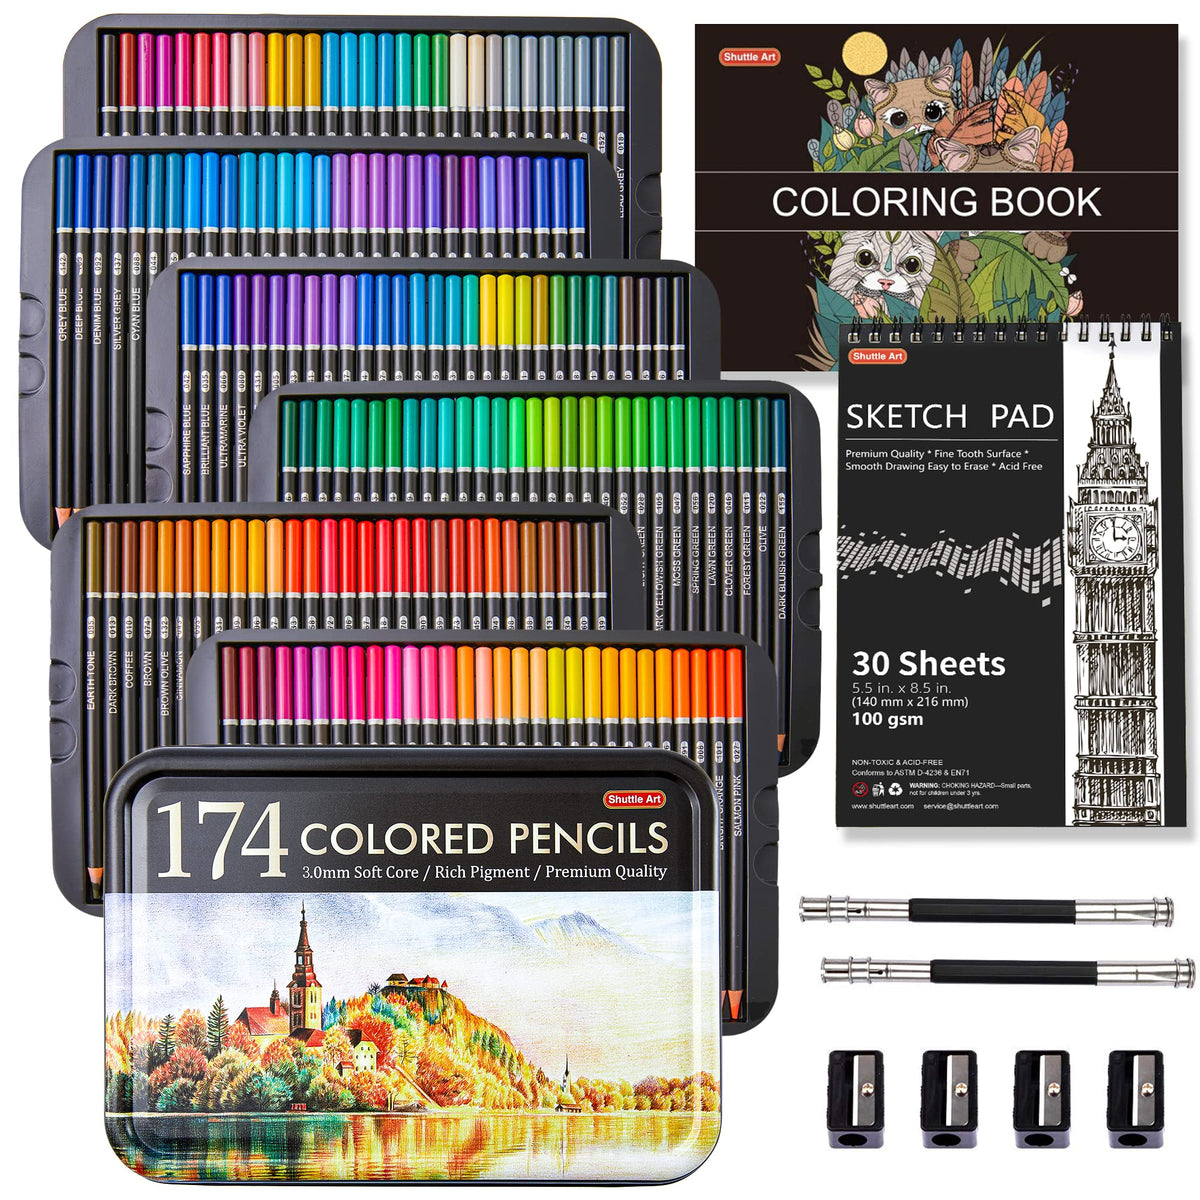 174 Colors Professional Colored Pencils, Shuttle Art Soft Core Colorin —  CHIMIYA